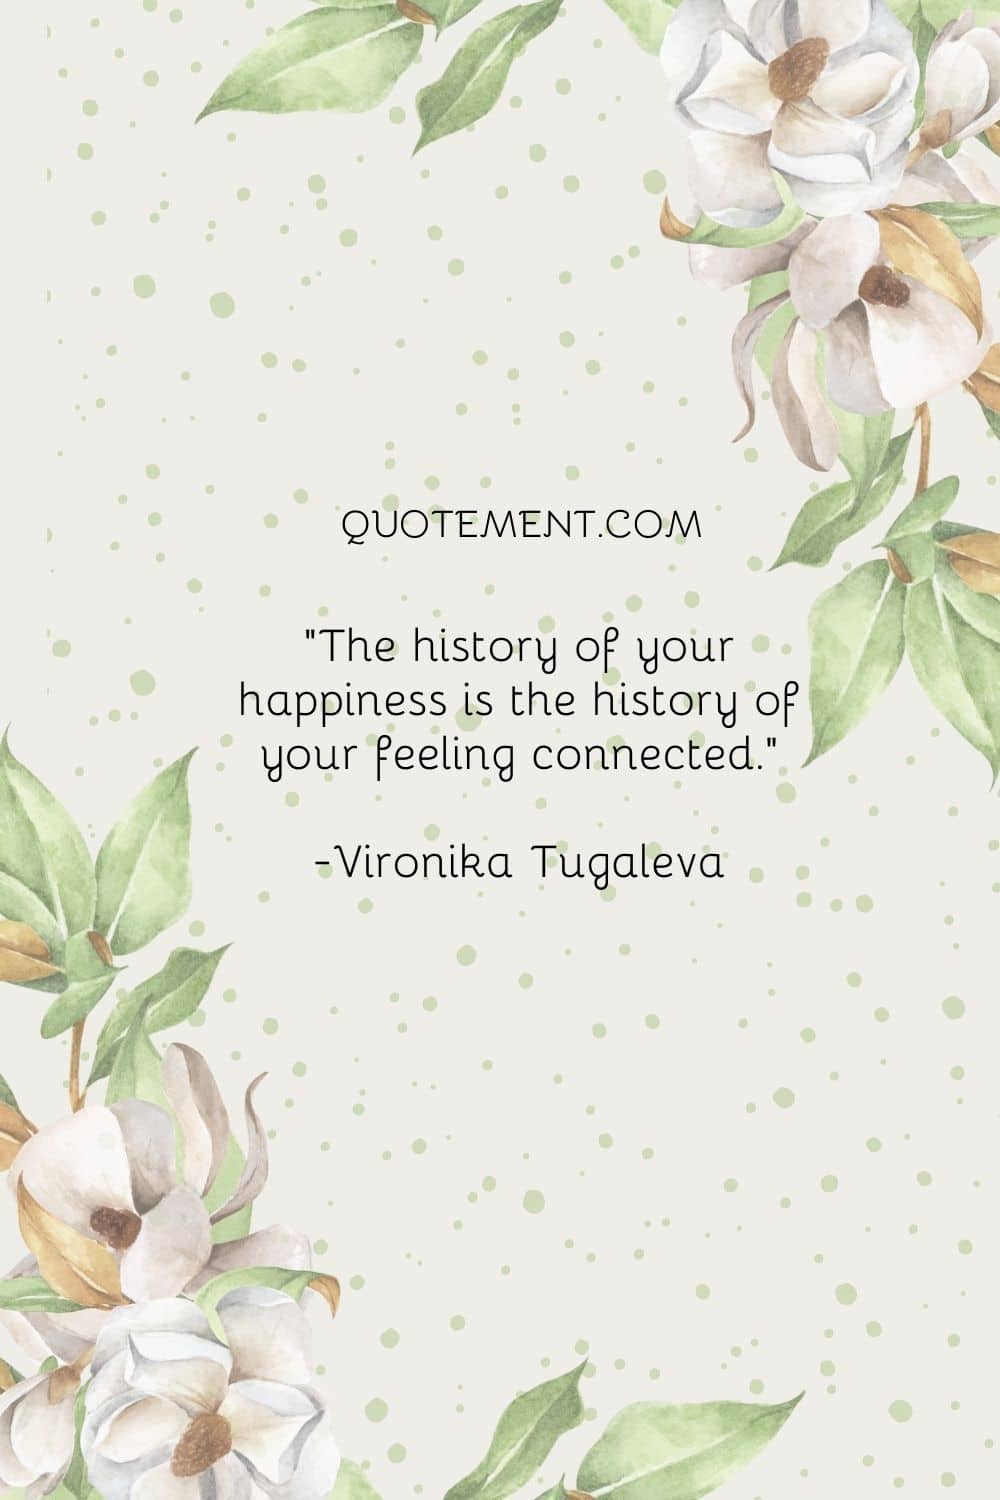 The history of your happiness is the history of your feeling connected.